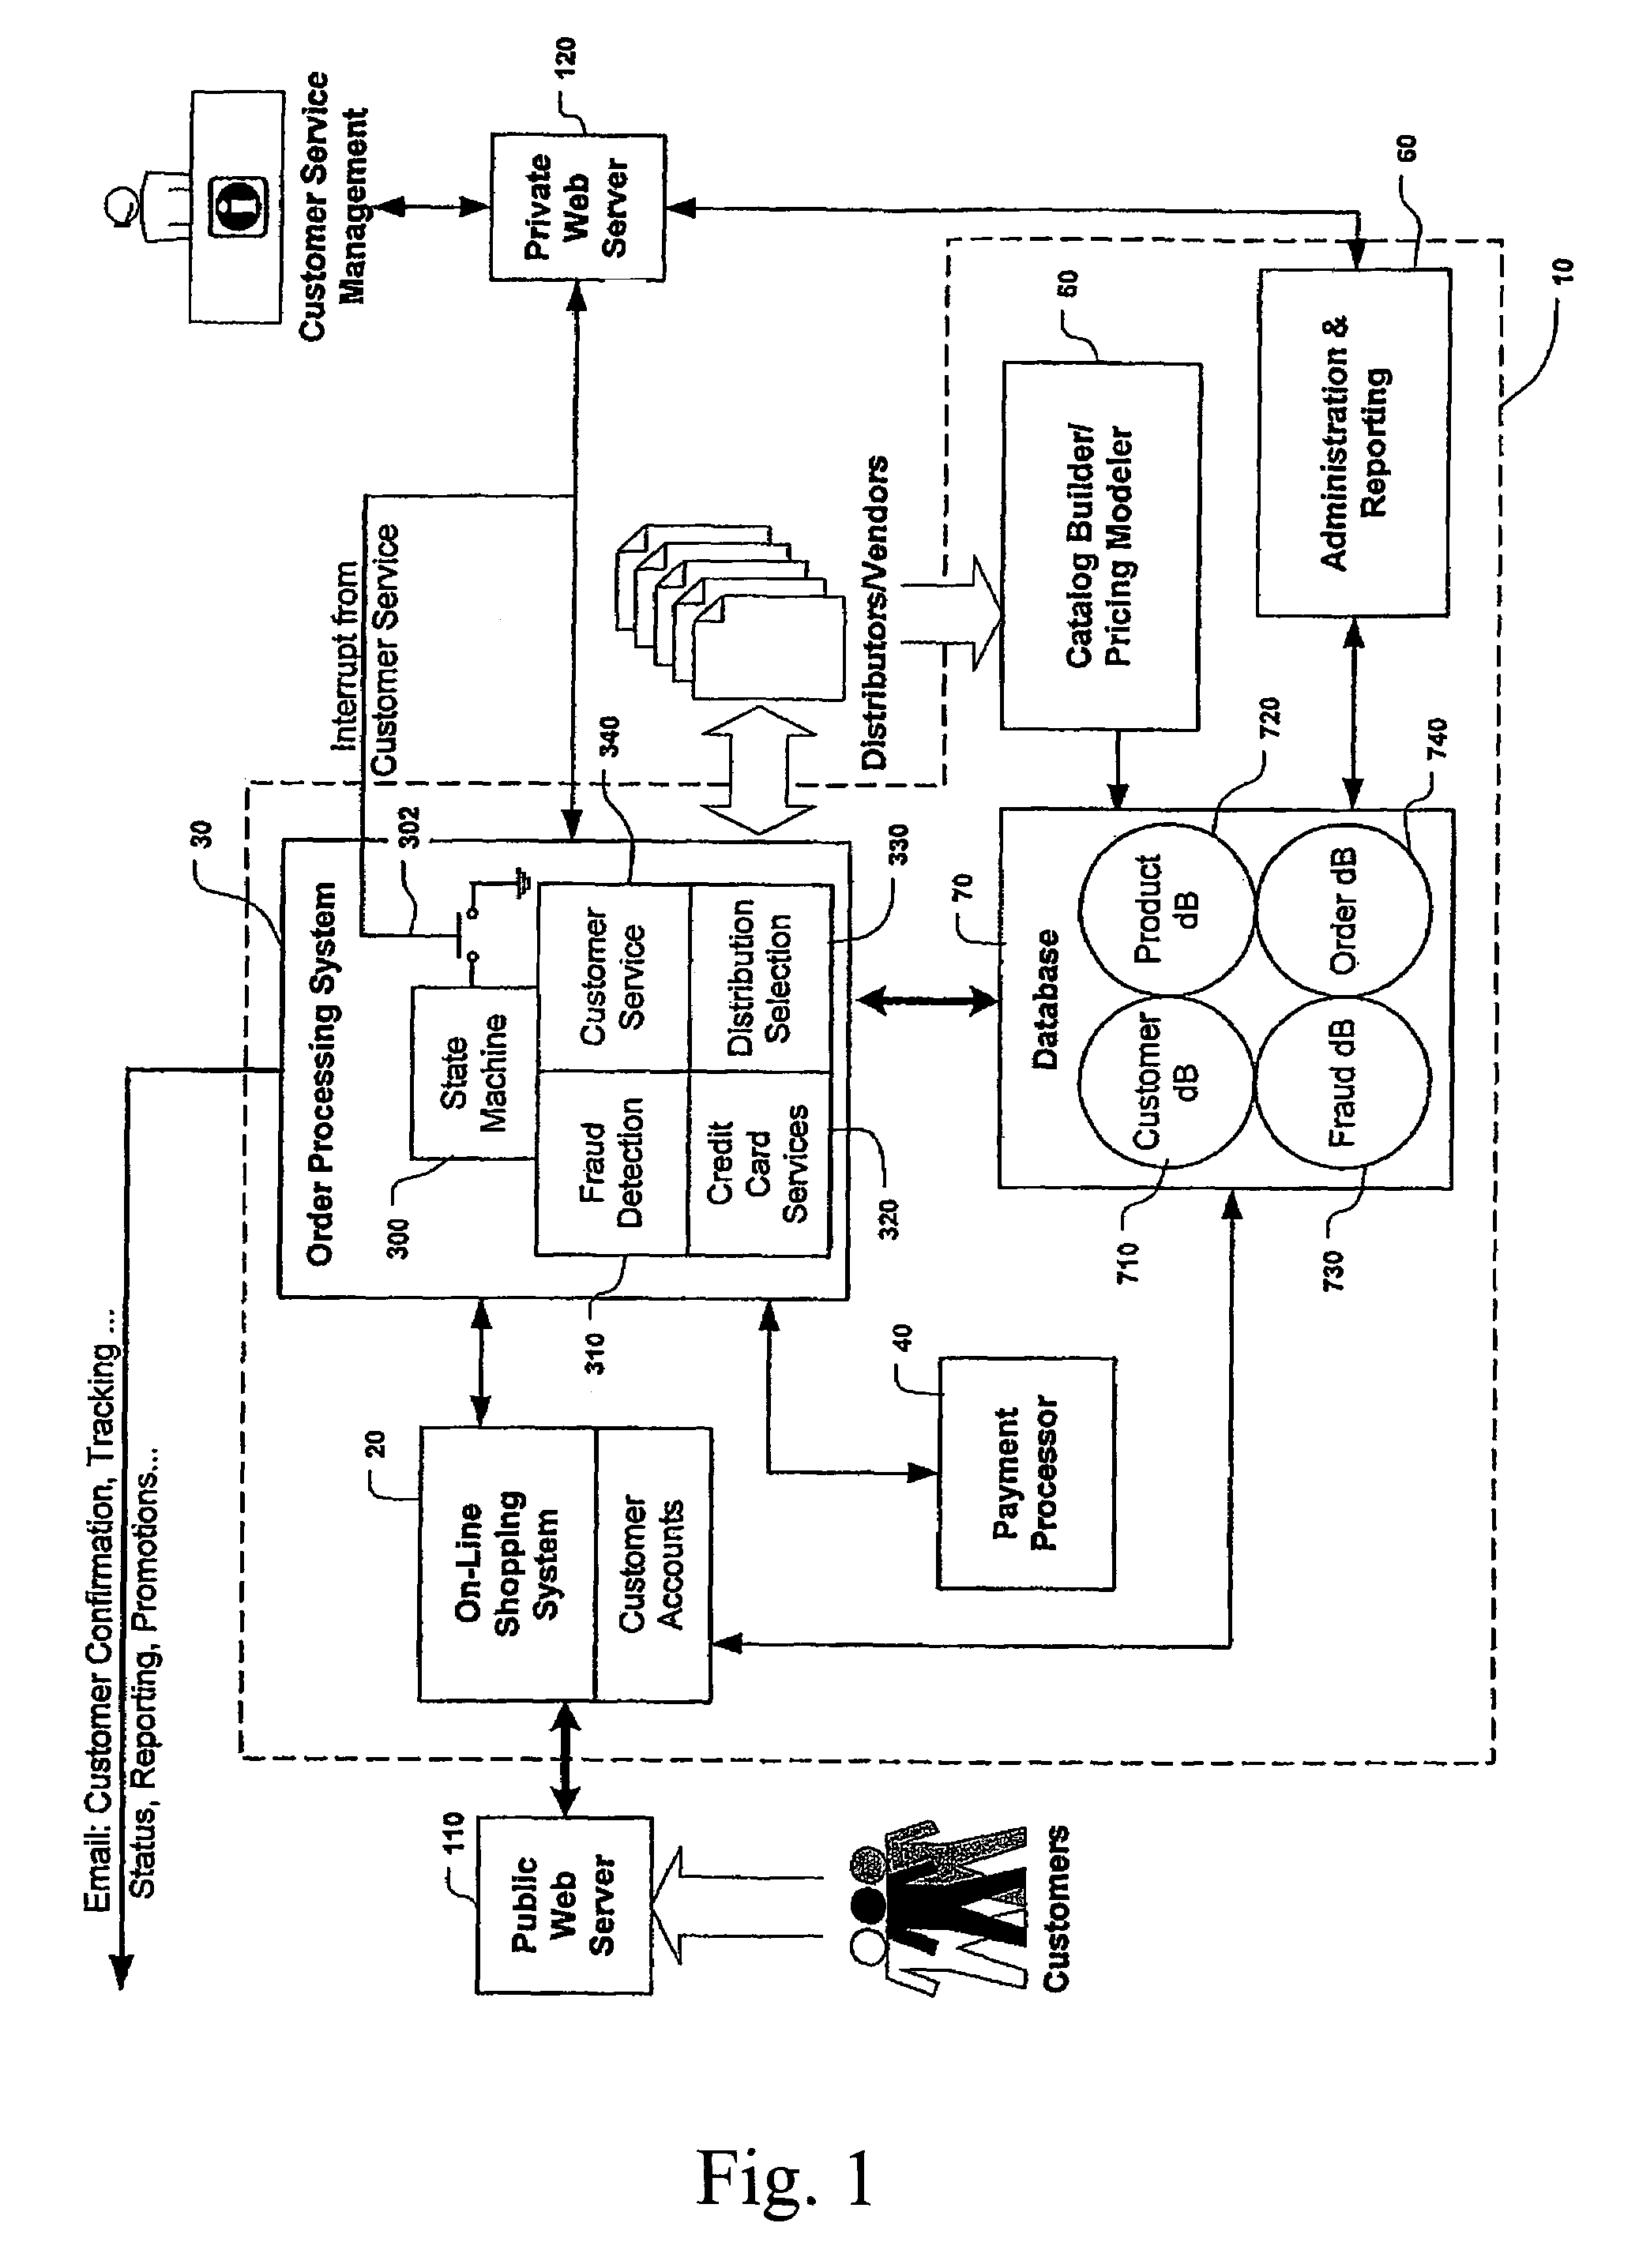 Multi-level fraud check with dynamic feedback for internet business transaction processor